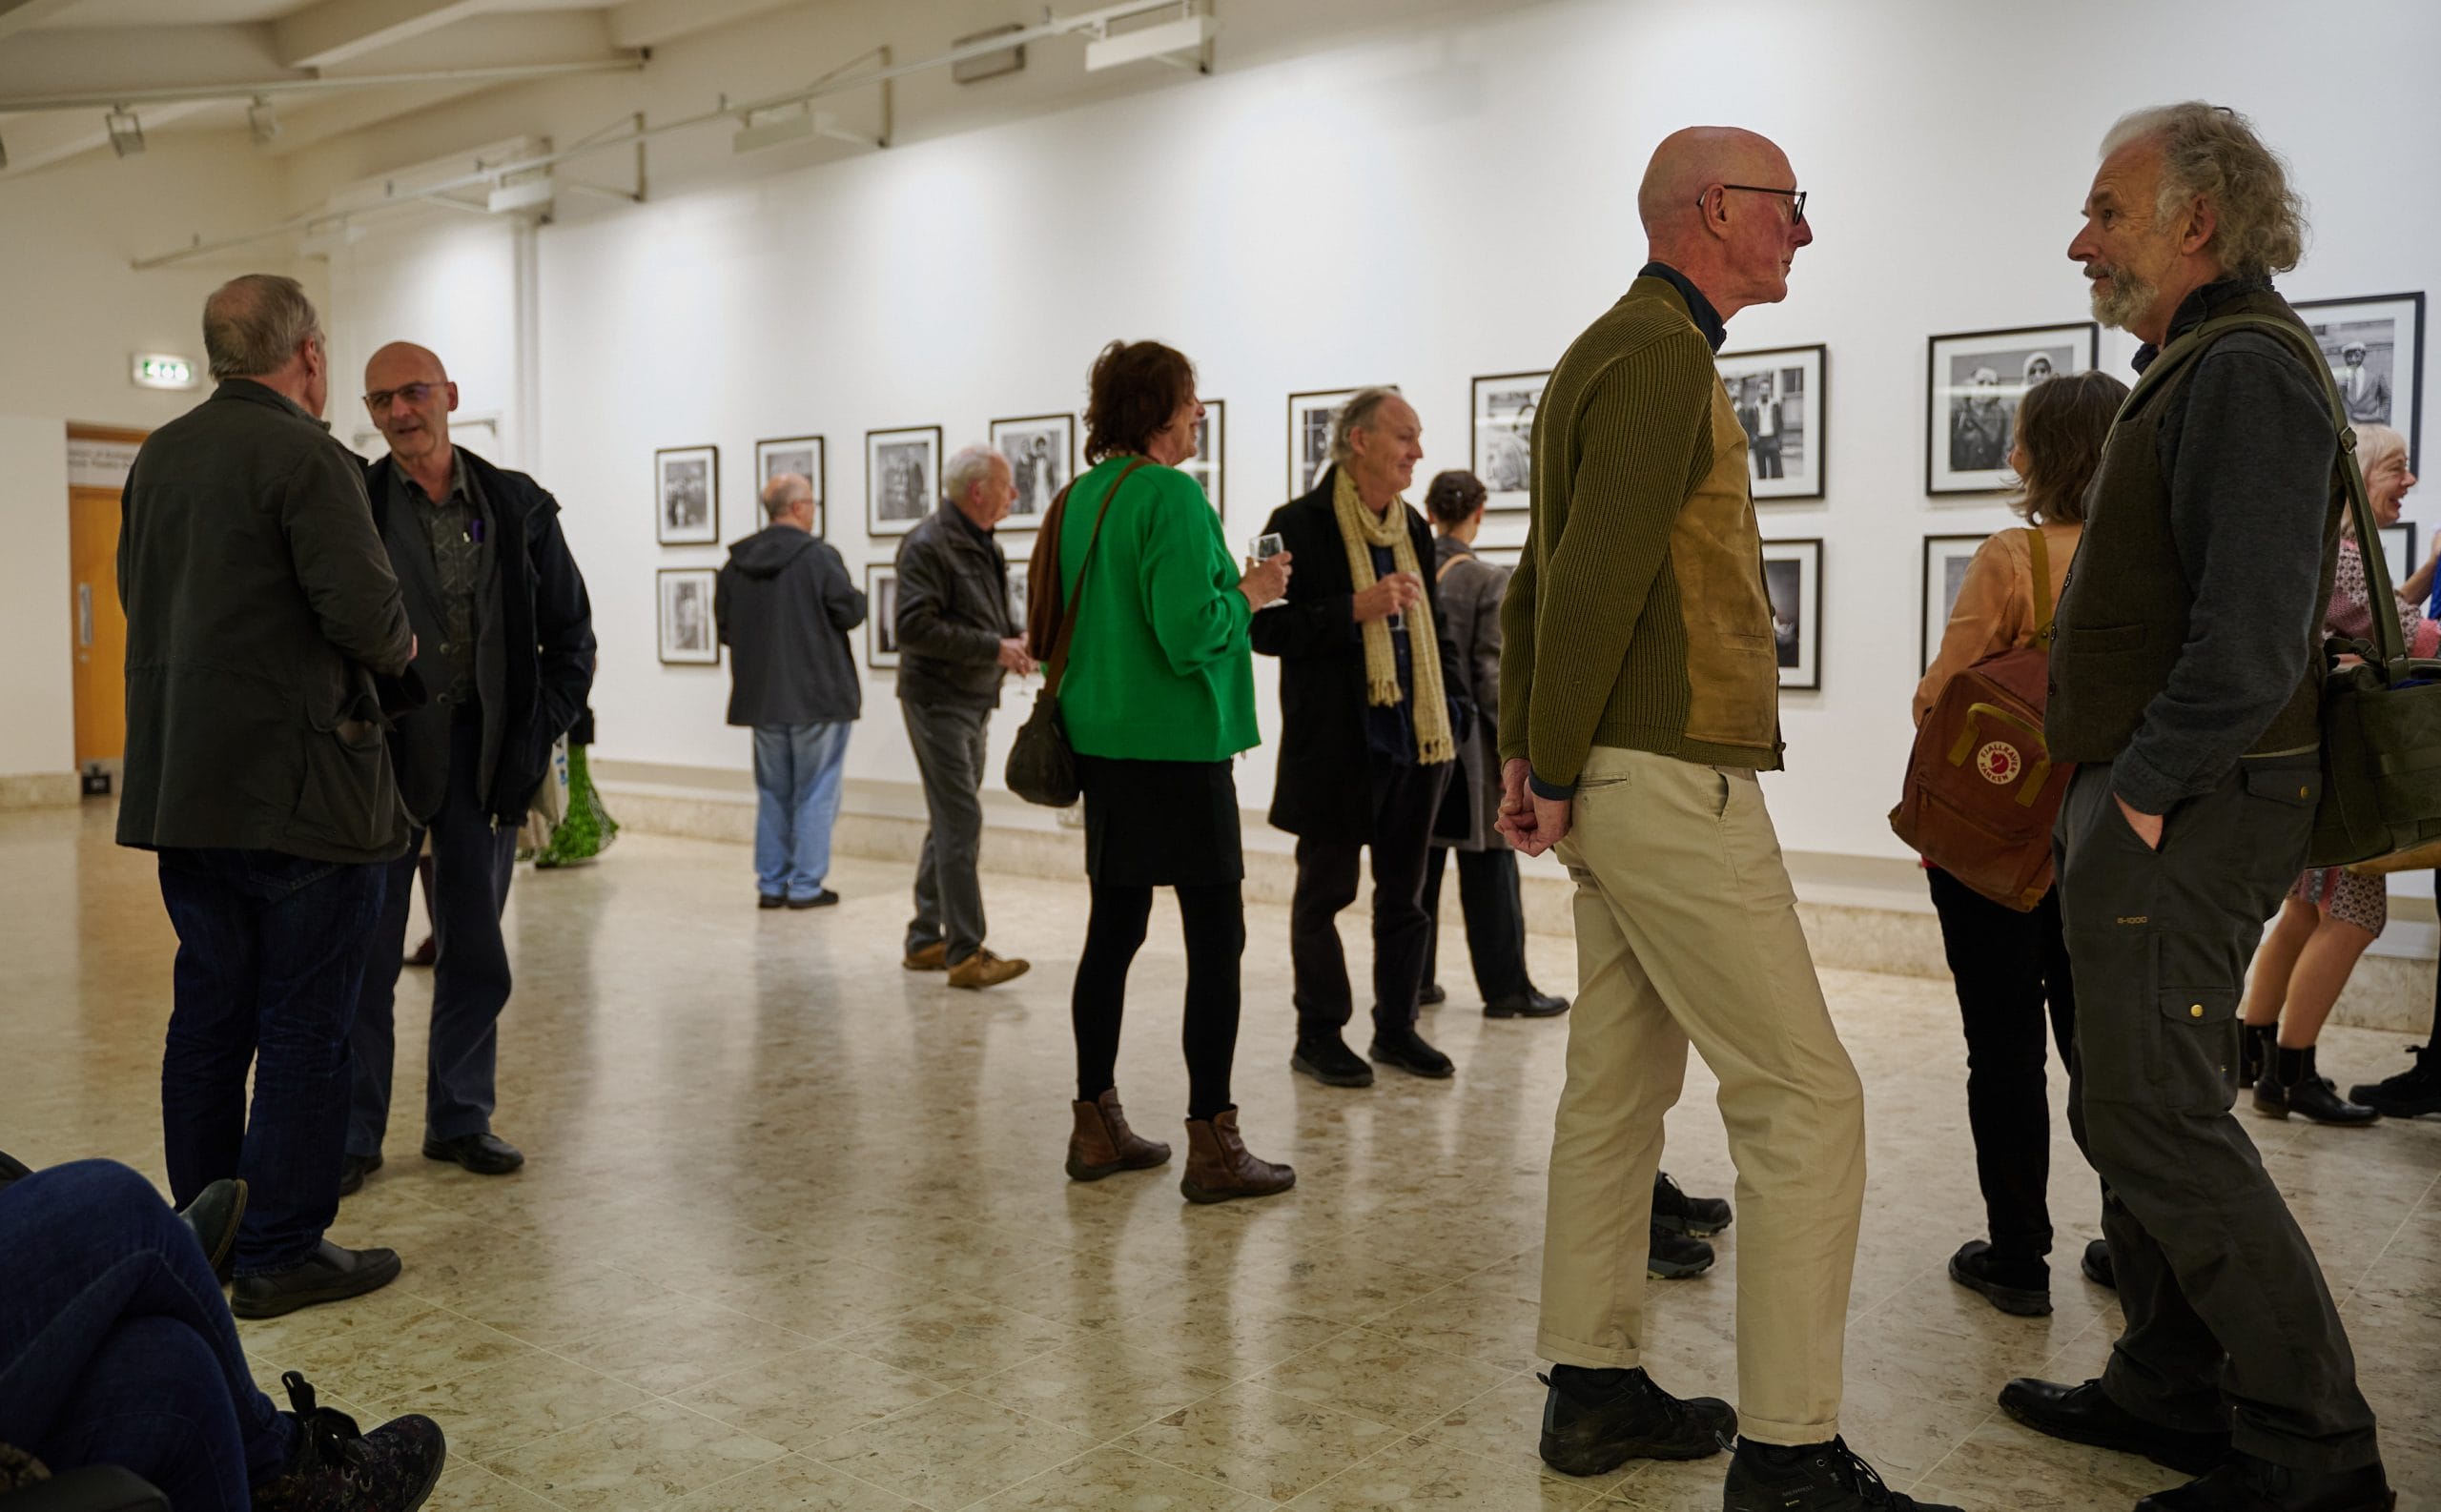 People enjoying artworks and chatting in a bright, white art gallery.